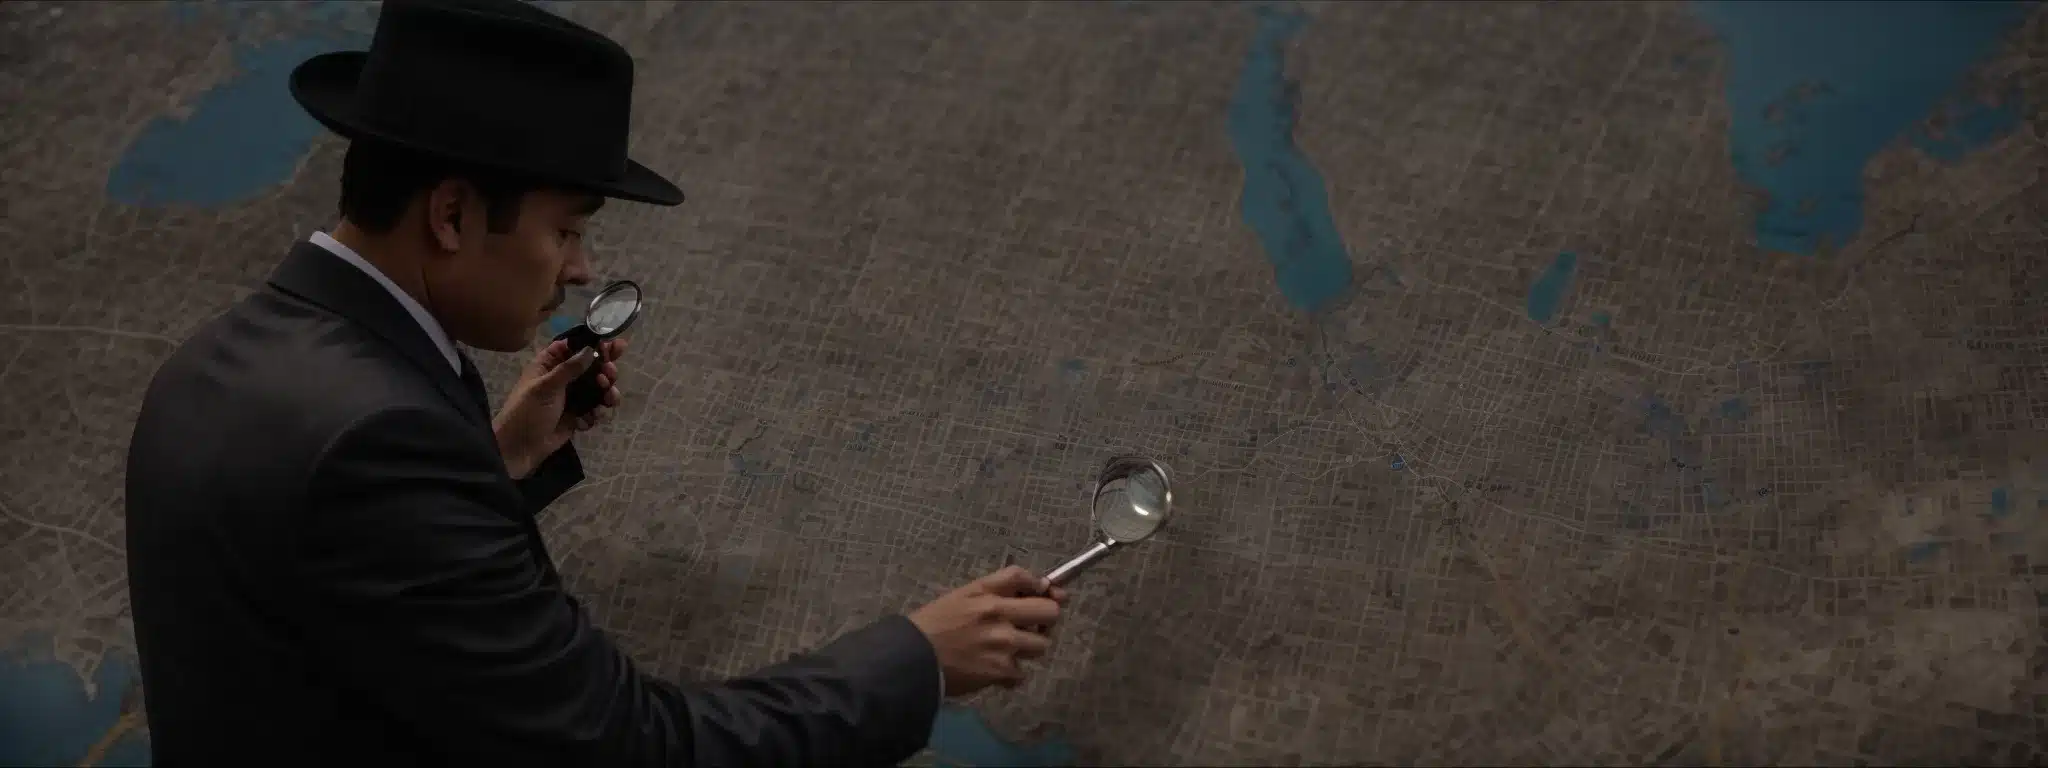 A Detective With A Magnifying Glass Leaned Over A Map Of New York City, Symbolizing The Strategic Search For Local Seo Keywords.